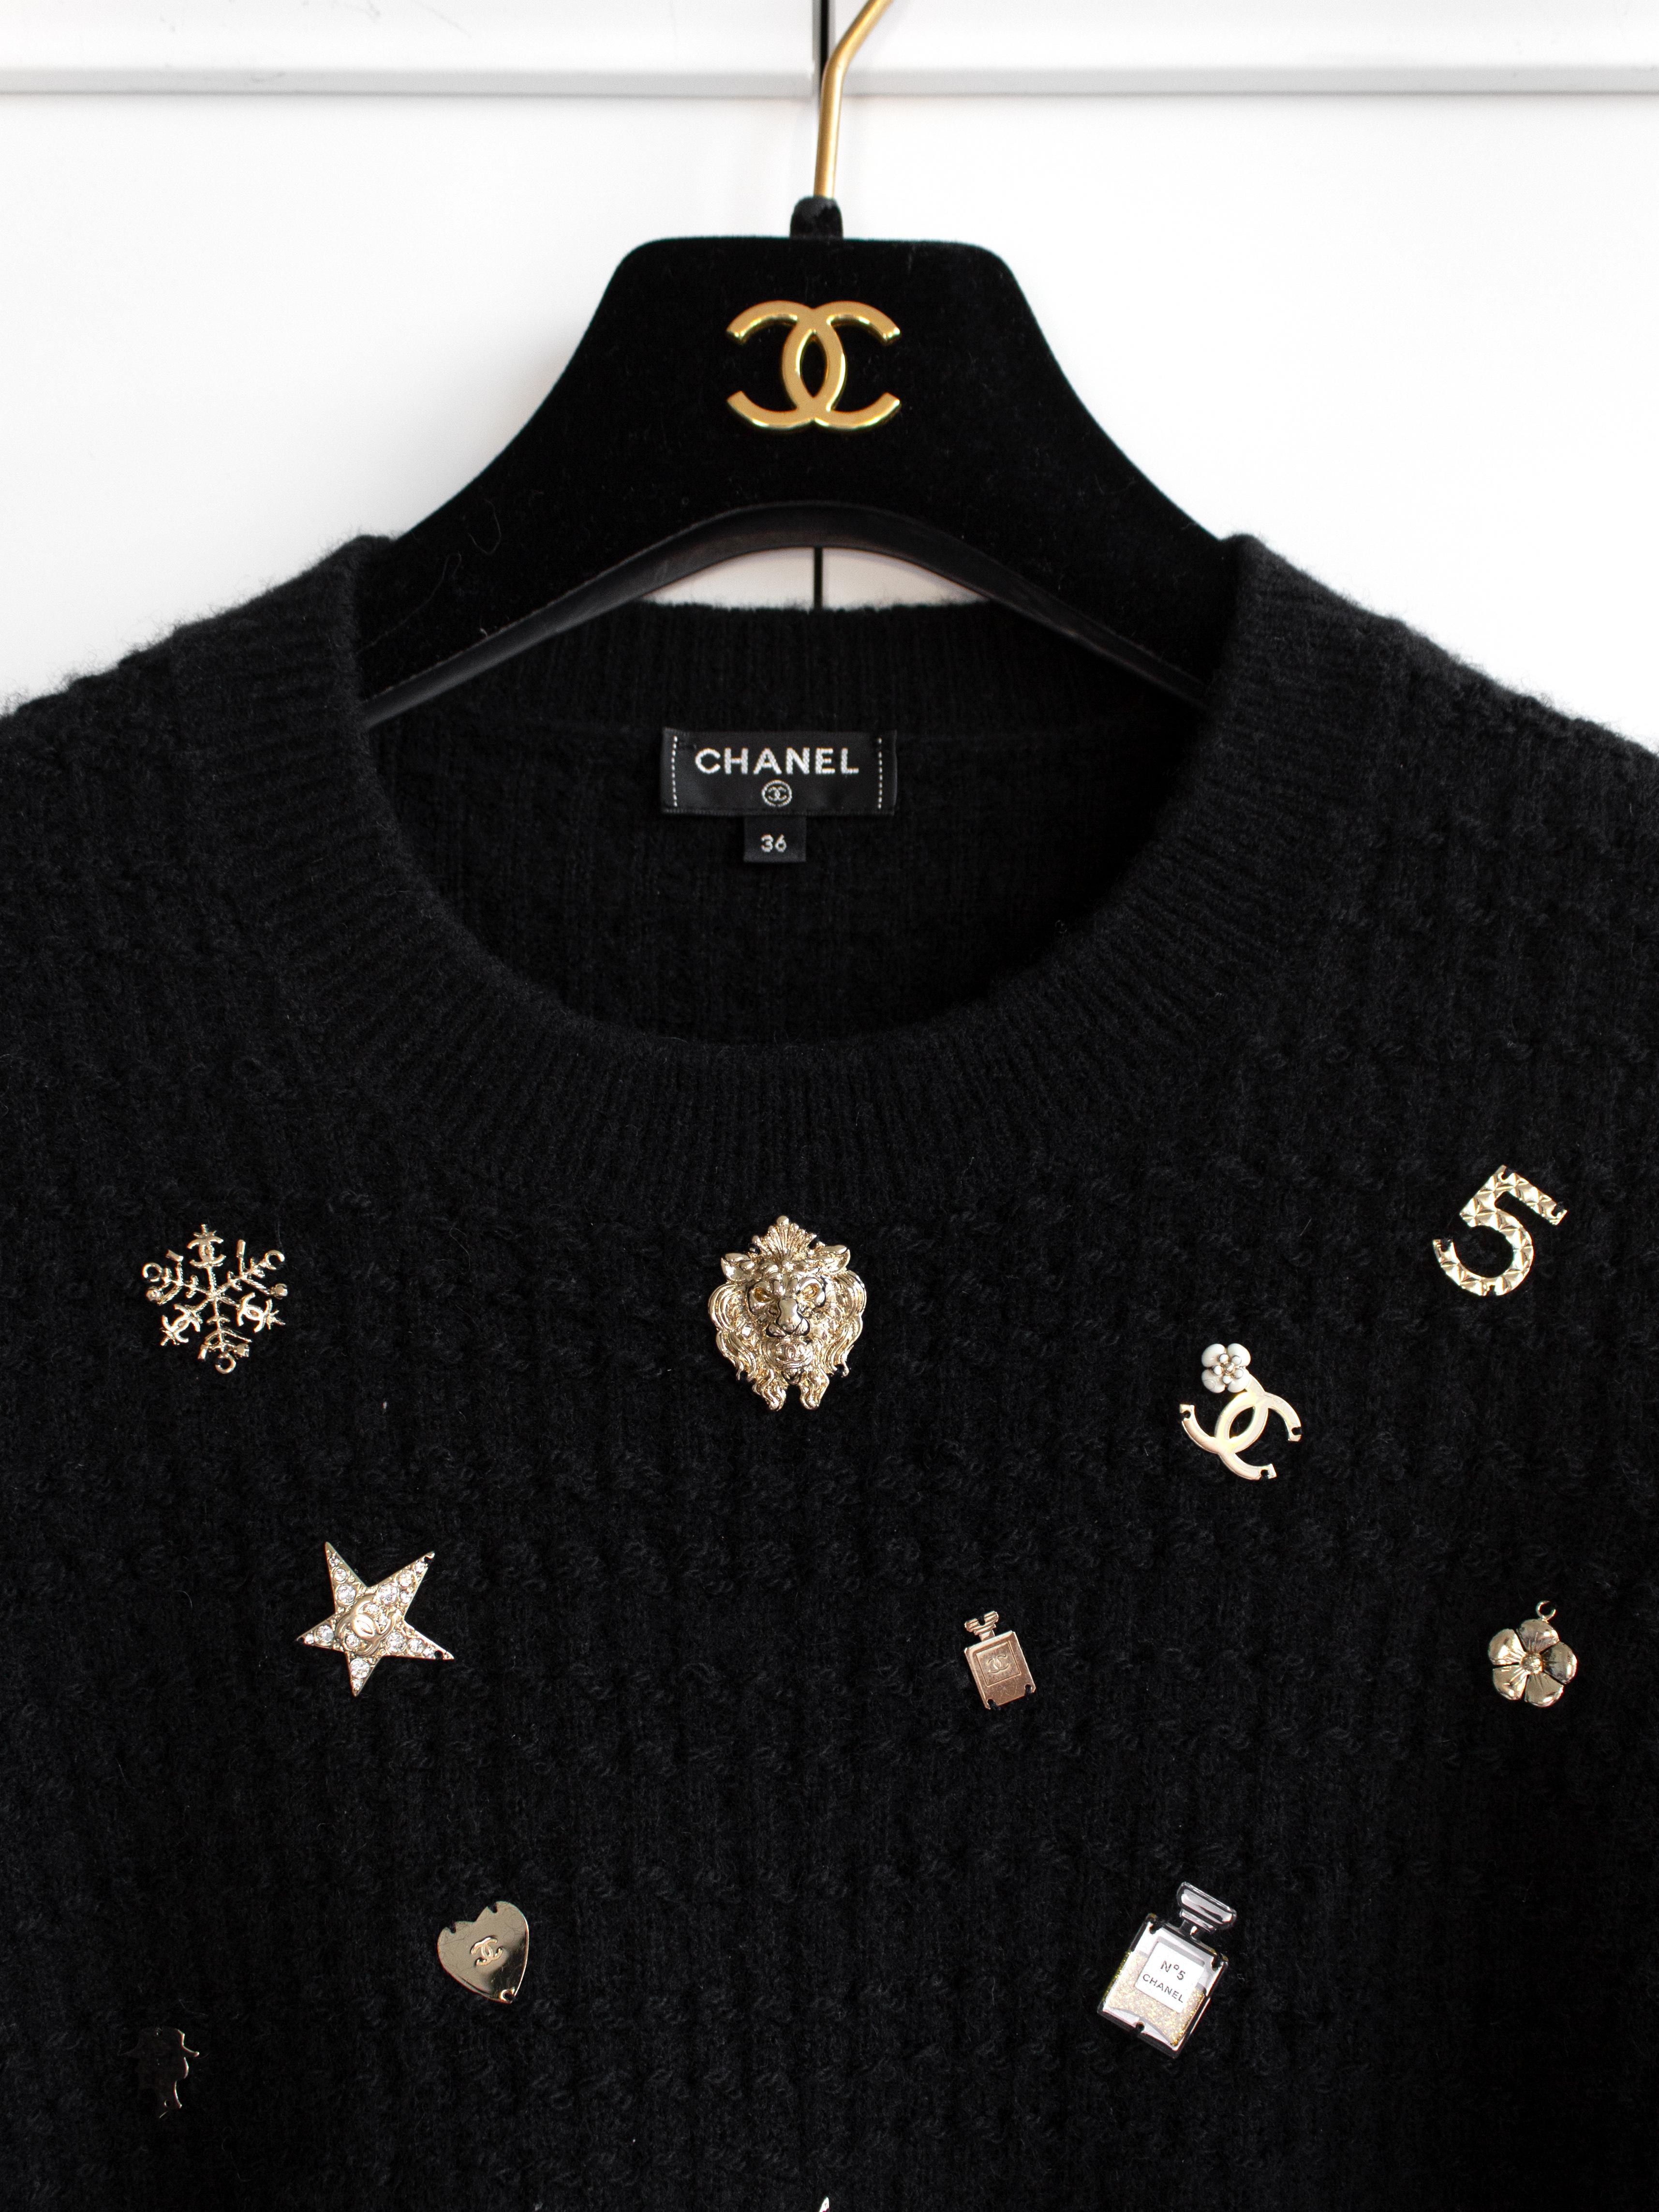 Chanel Coco Neige 2018 Lucky Charms Black Gold Embellished 18B Cashmere Sweater 3